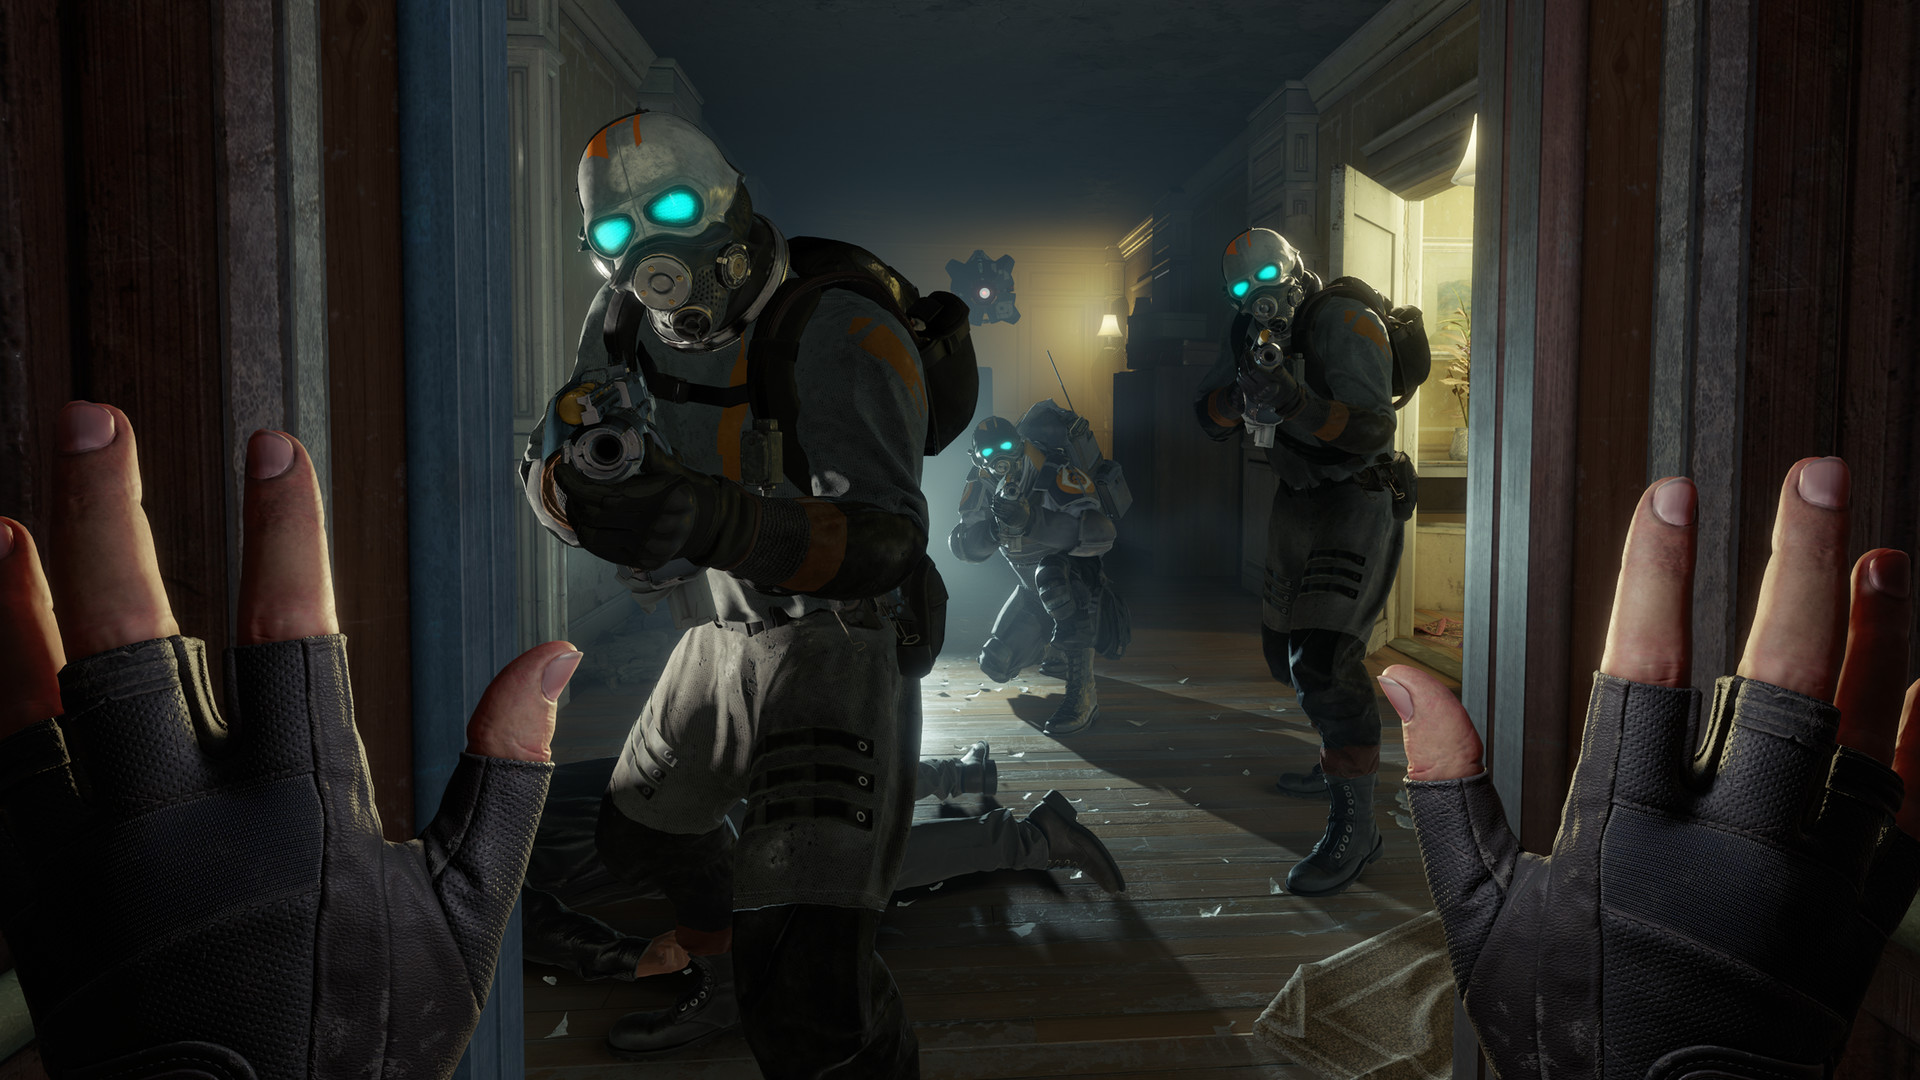 Hands up as enemies approach in Half-Life: Alyx